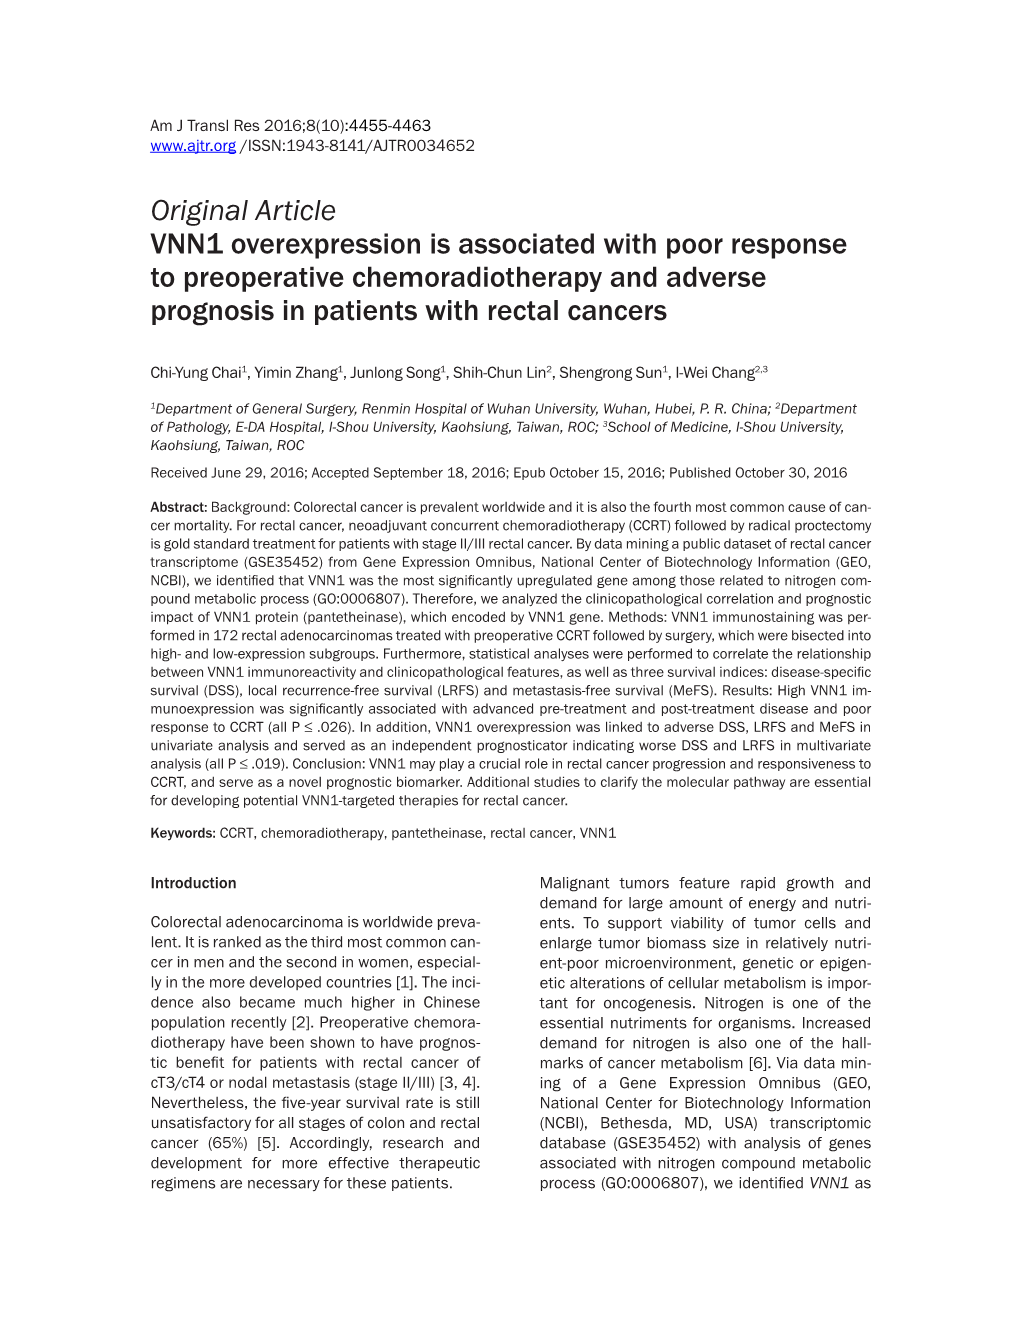 Original Article VNN1 Overexpression Is Associated with Poor Response to Preoperative Chemoradiotherapy and Adverse Prognosis in Patients with Rectal Cancers